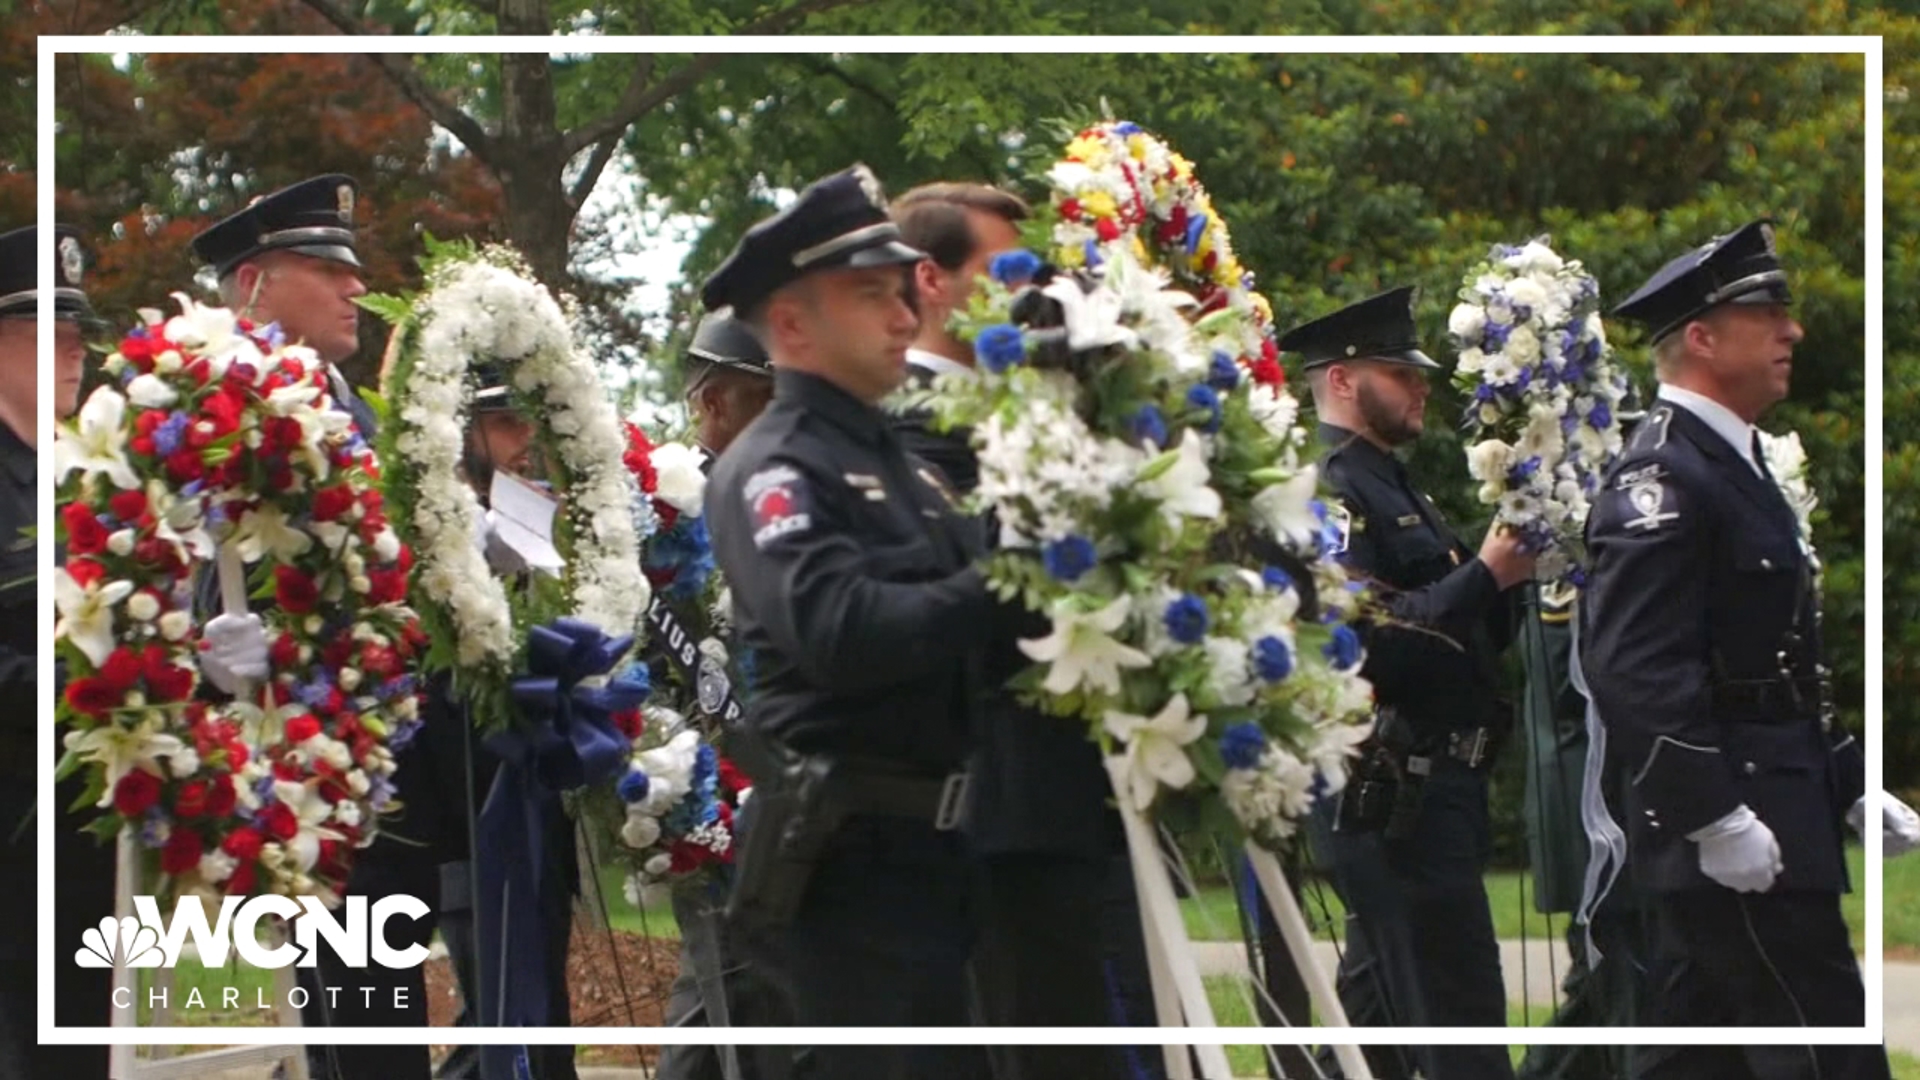 The community continues to remember the lives and sacrifice of the four officers killed in the line of duty nearly three weeks ago.